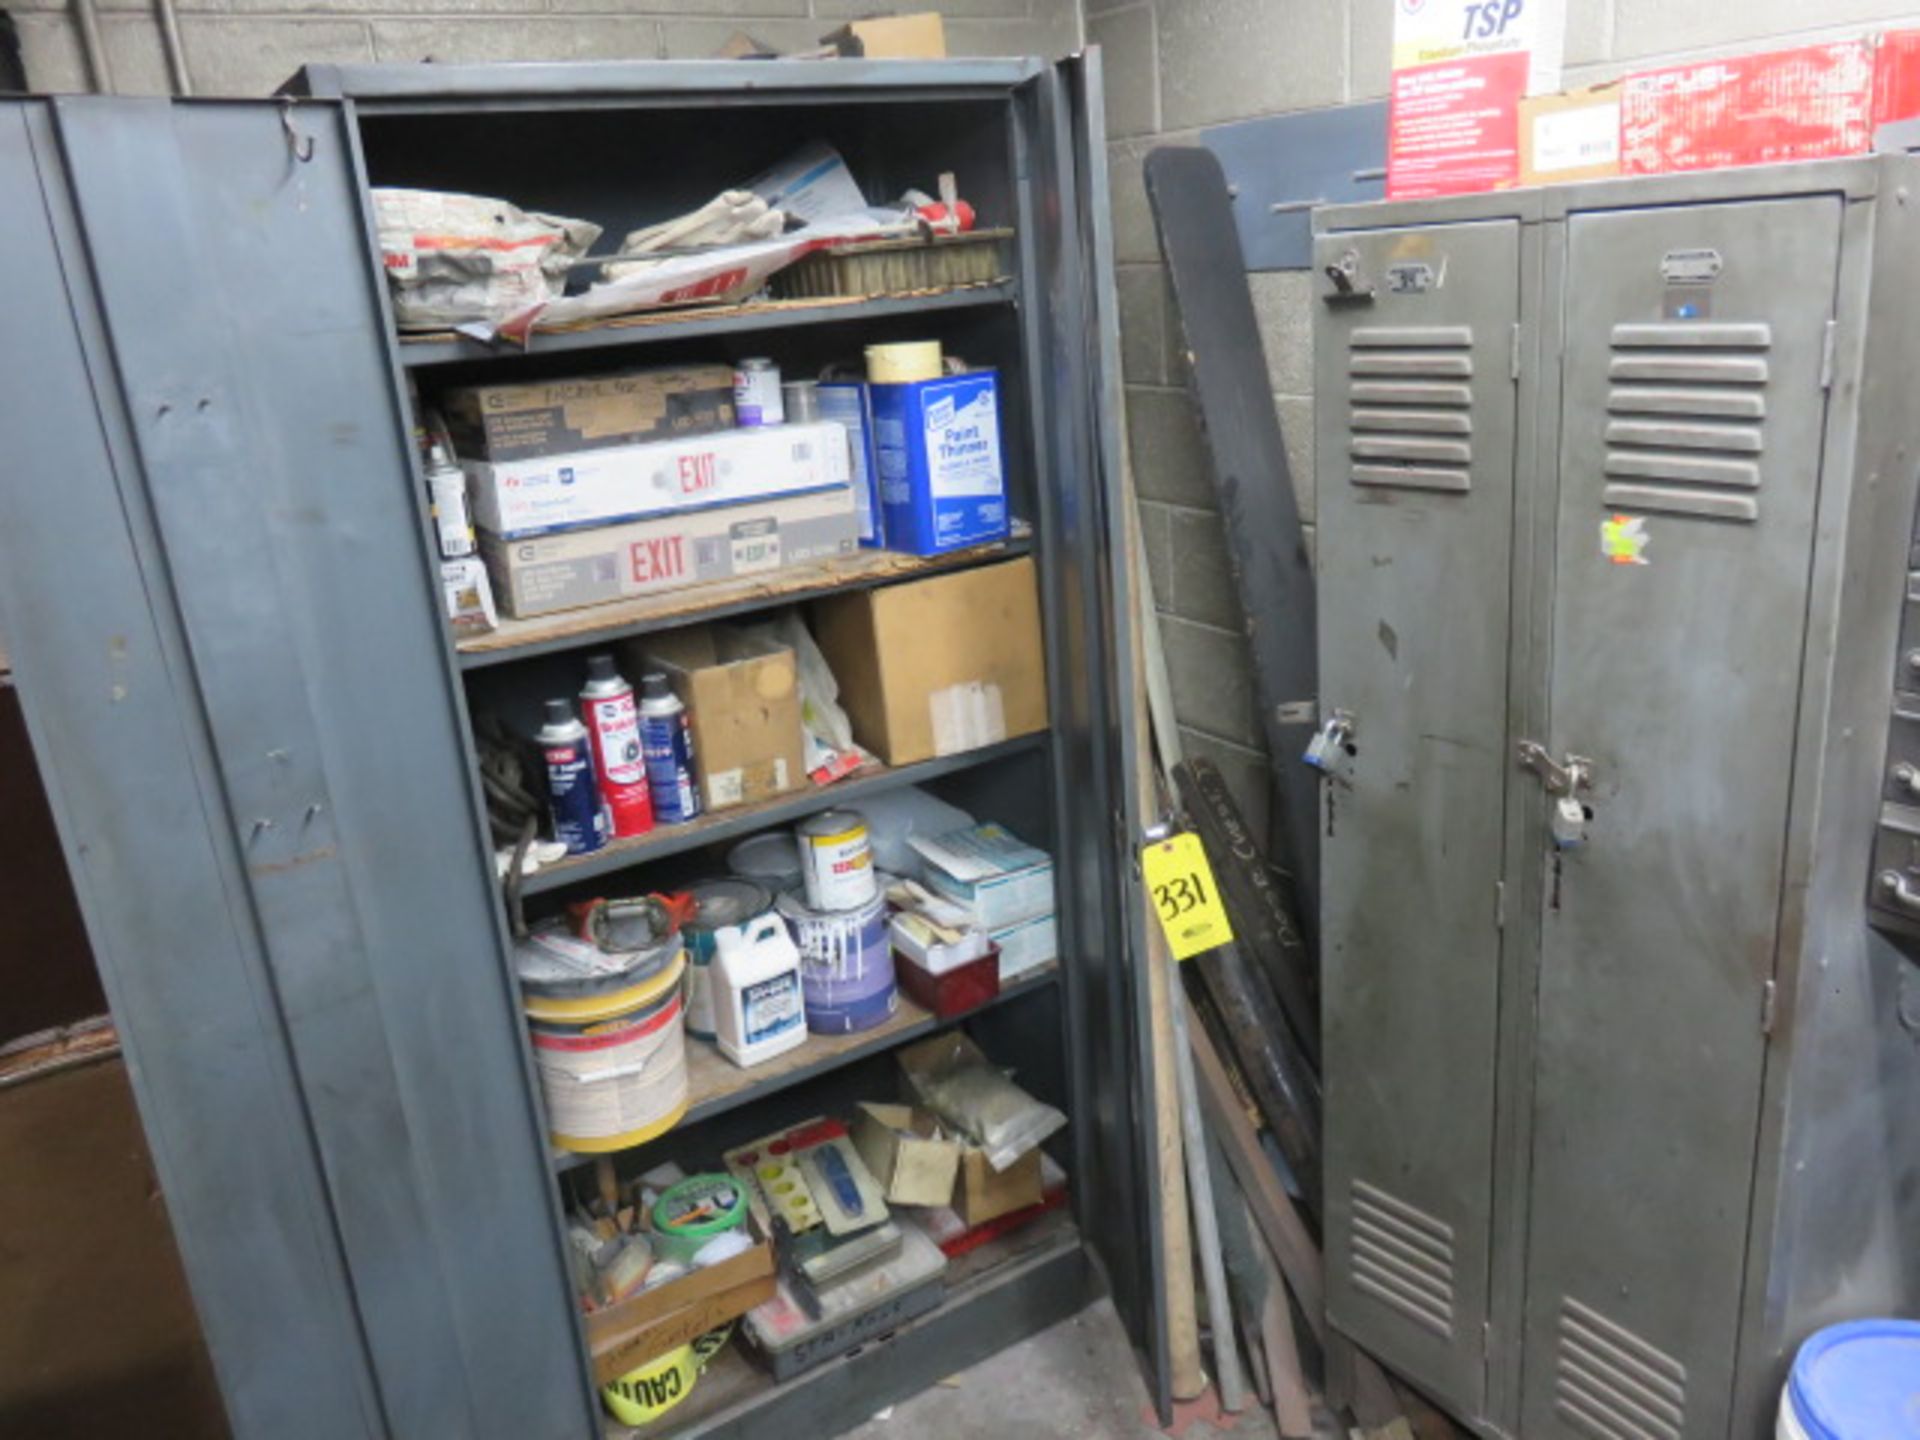 DOUBLE DOOR SUPPLY CABINET WITH CONTENTS, INCLUDING DOOR EXIT SIGNS AND GENERAL MAINTENANCE SUPPLIES